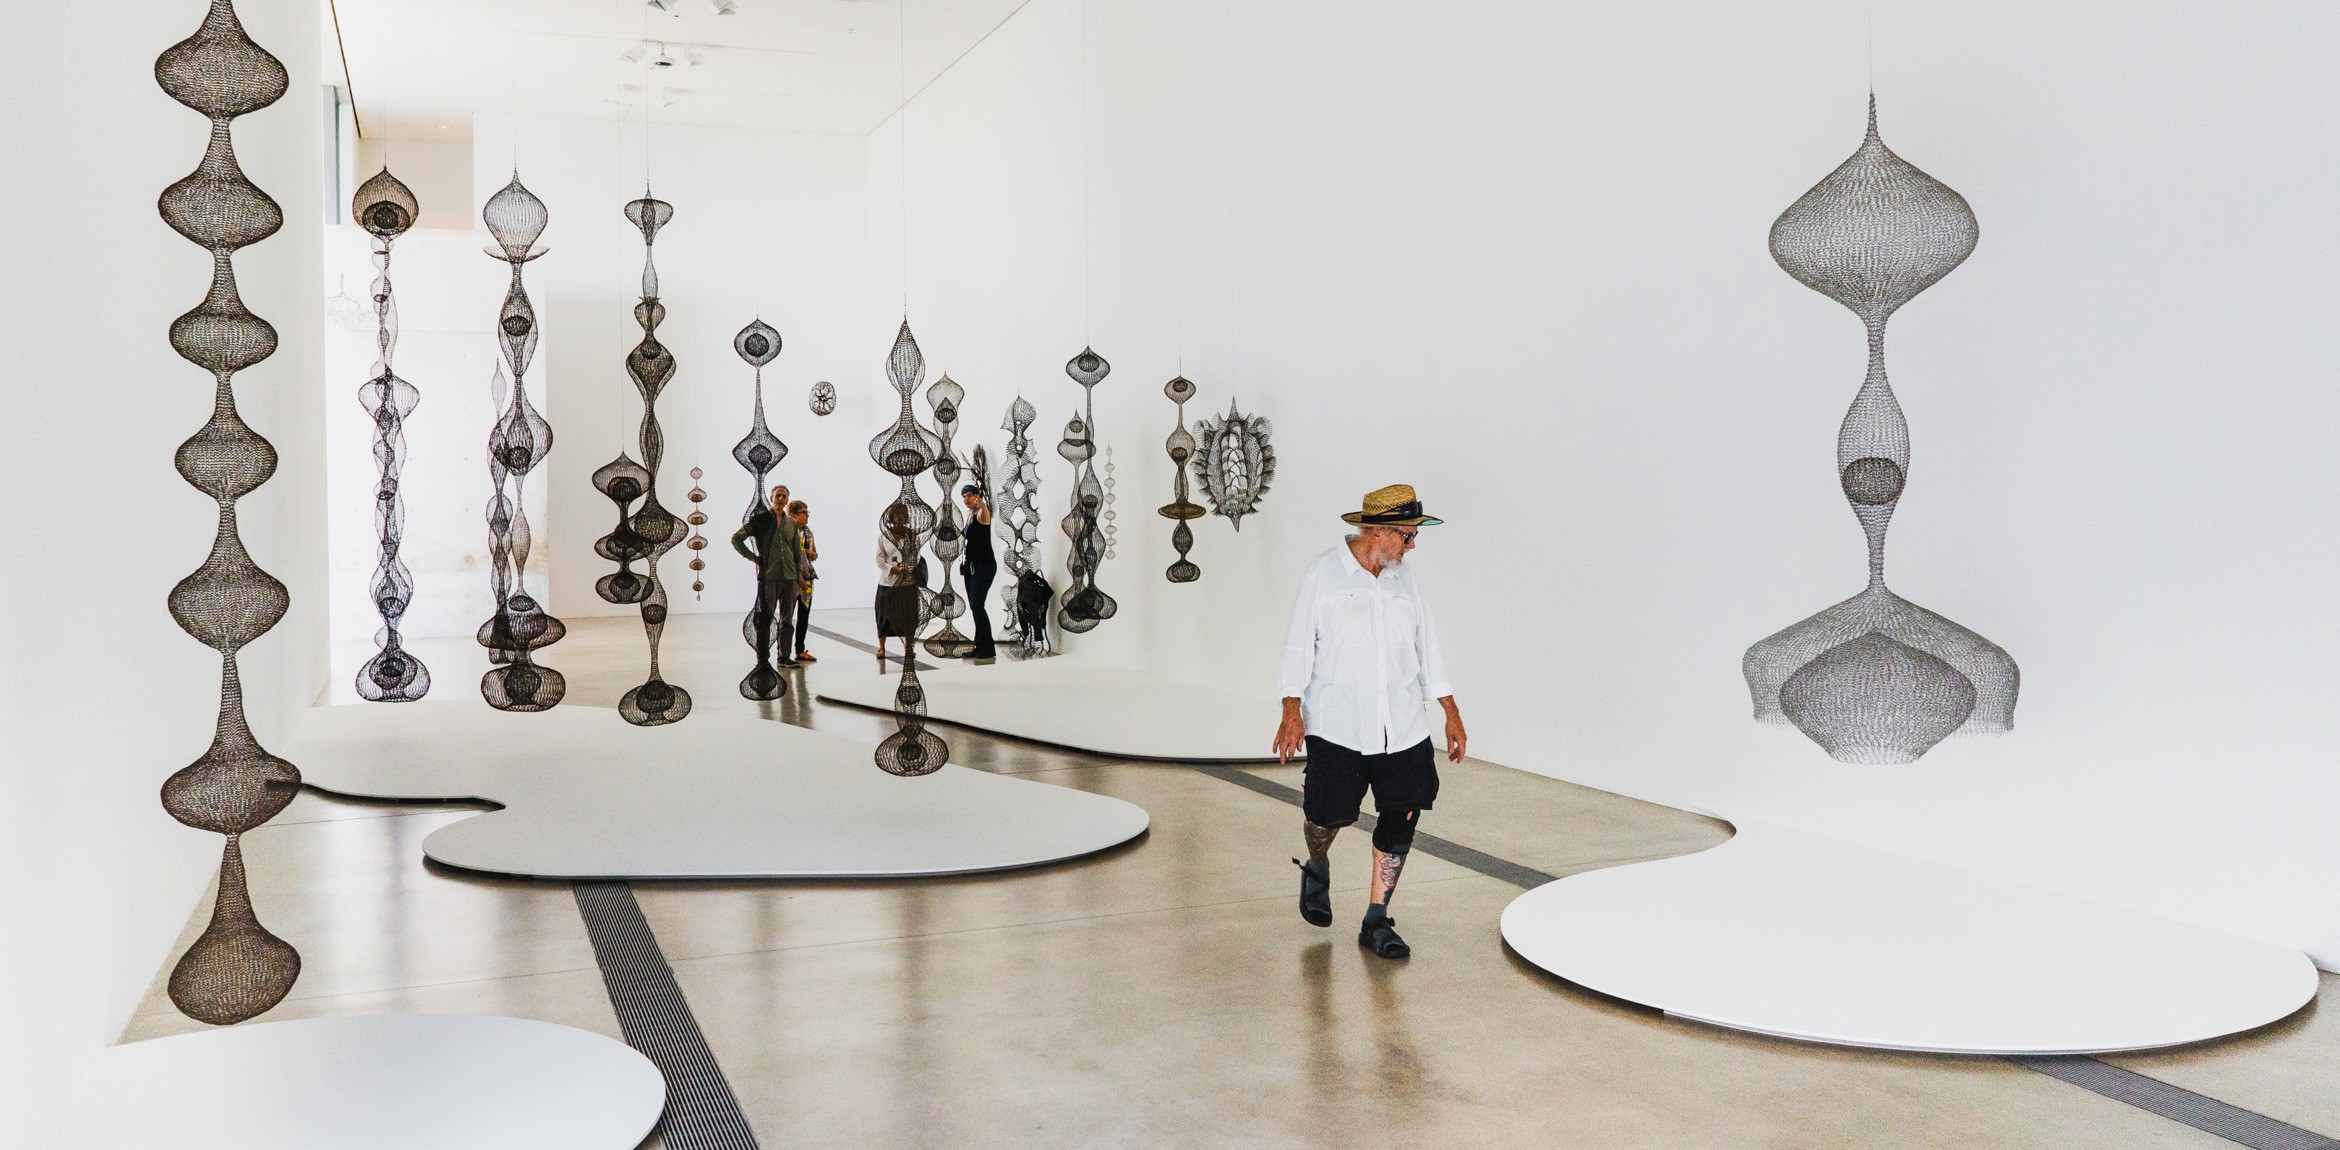 Visitors stand amid Ruth Asawa's hanging wire sculptures in the Main Gallery.